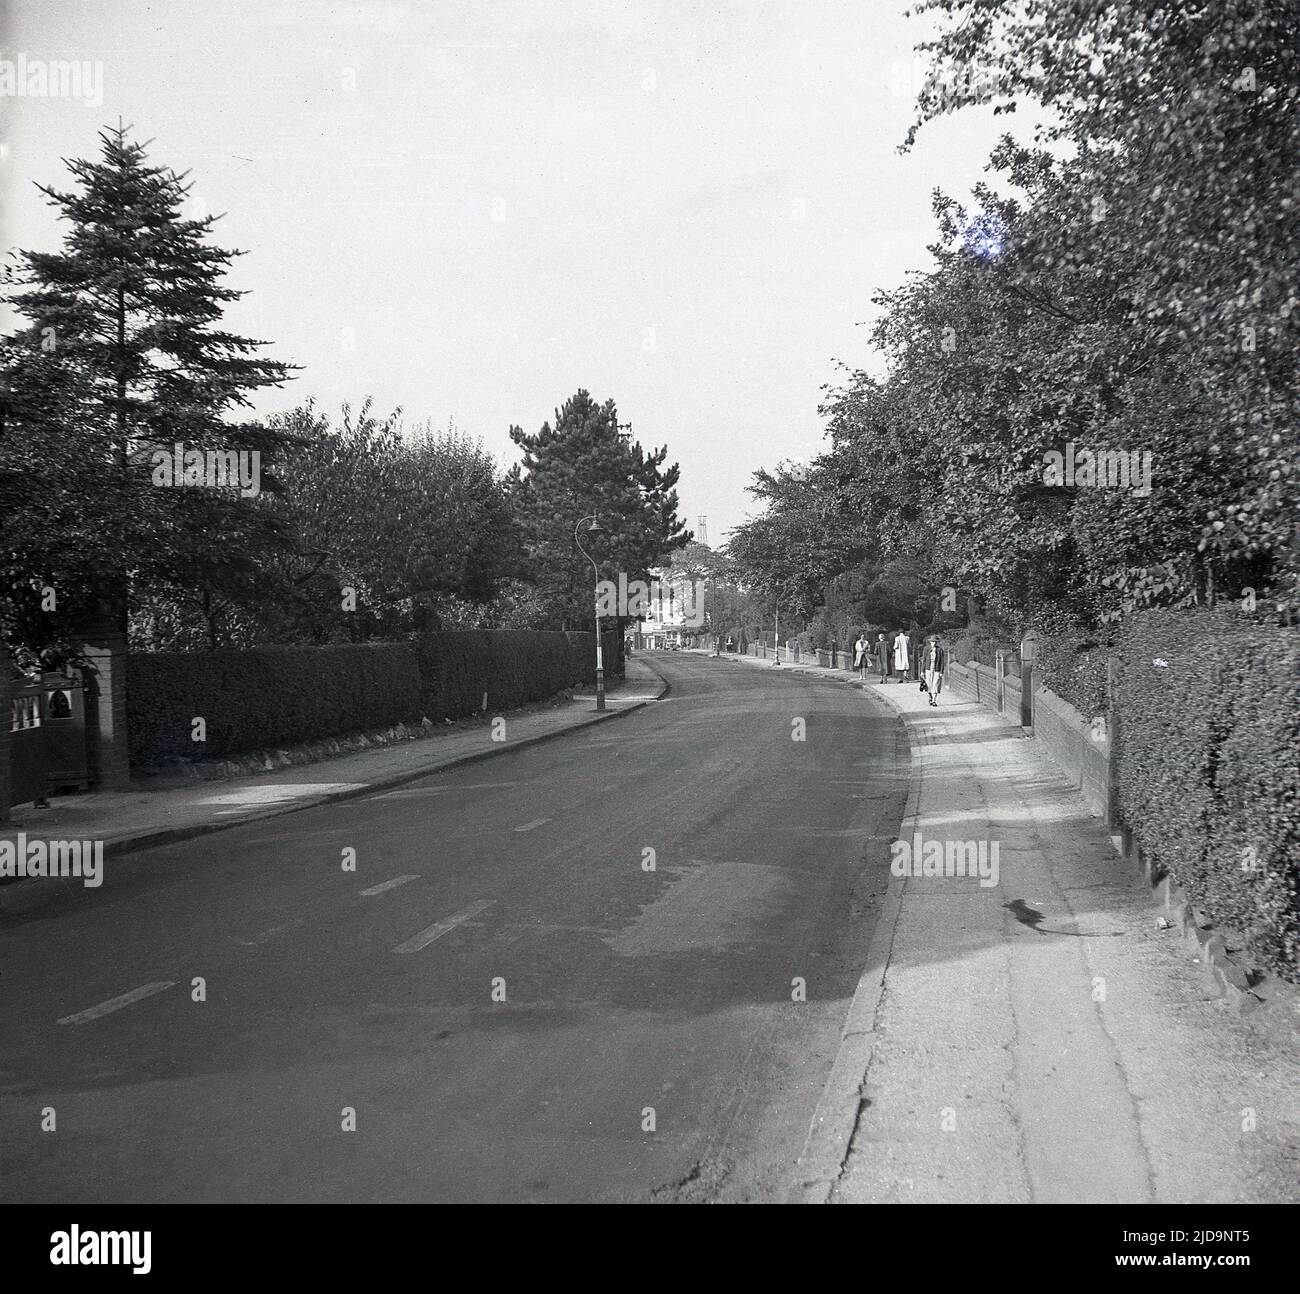 1940s, historical, a view of Woodford Rd, a wide tree-lined suburban road leading into the village of Bramhall, a prosperous suburb of Stockport, Cheadle, England, UK. Bramhall is known for its magnificent 14th century Tudor manor house, Bramall Hall and for its one time 'Tudor' cinema. Stock Photo